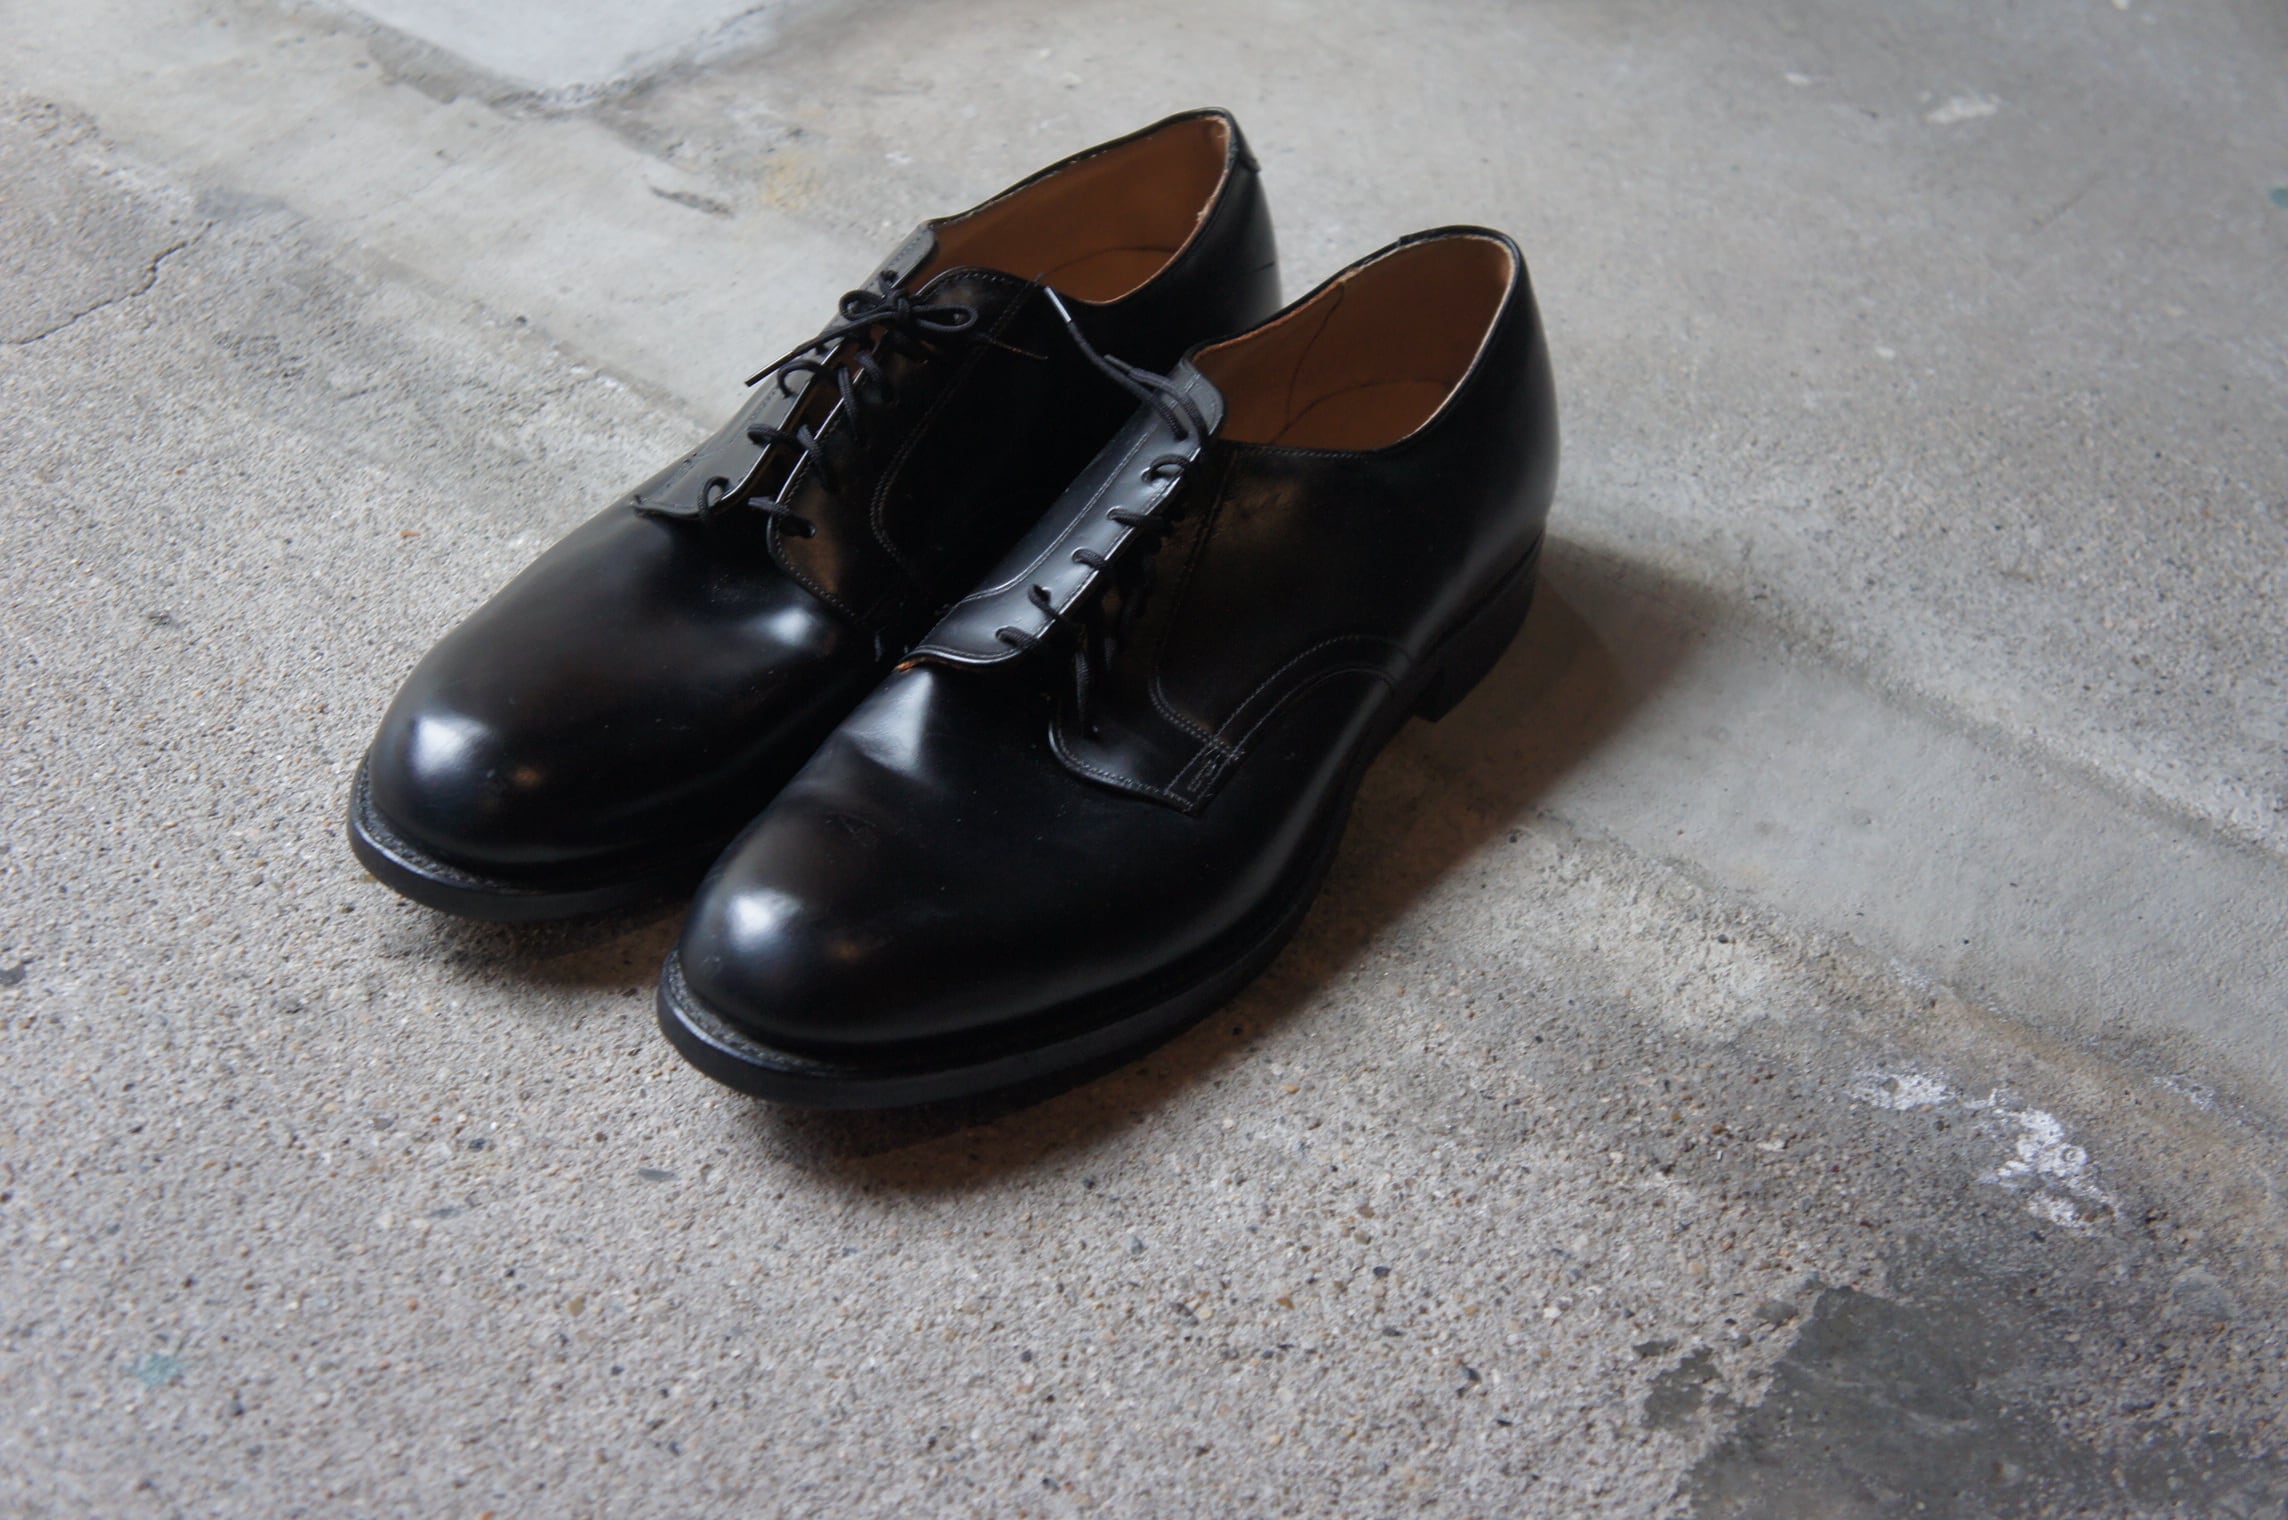 NOS '67 U.S.Navy Service Shoes | oddment store  /vintage・antique・vintage・leather shoes powered by BASE